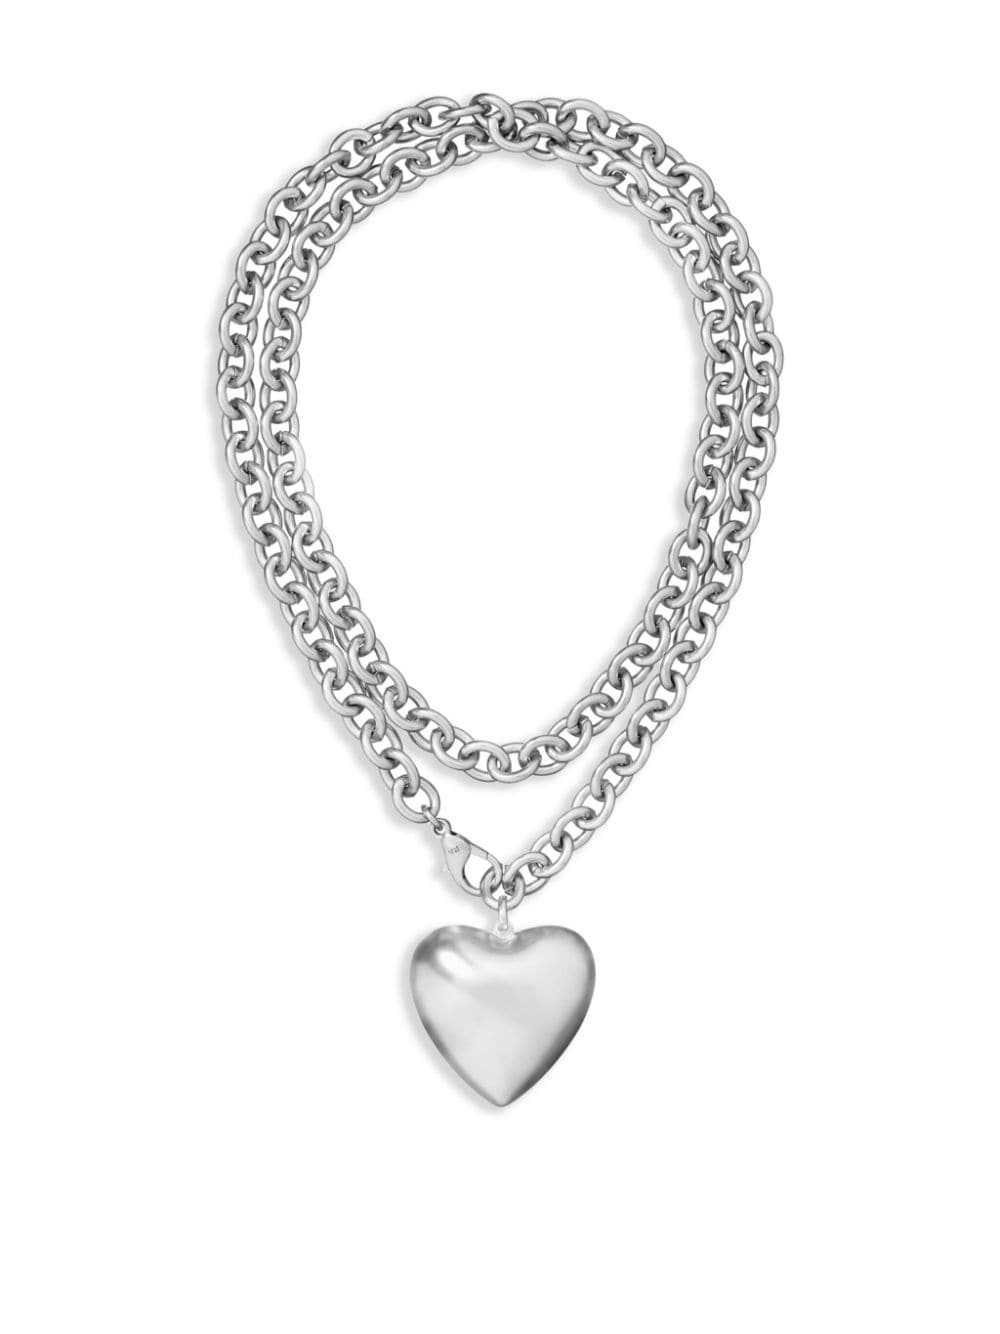 Roxanne Assoulin The Puffy Heart Necklace In Silver